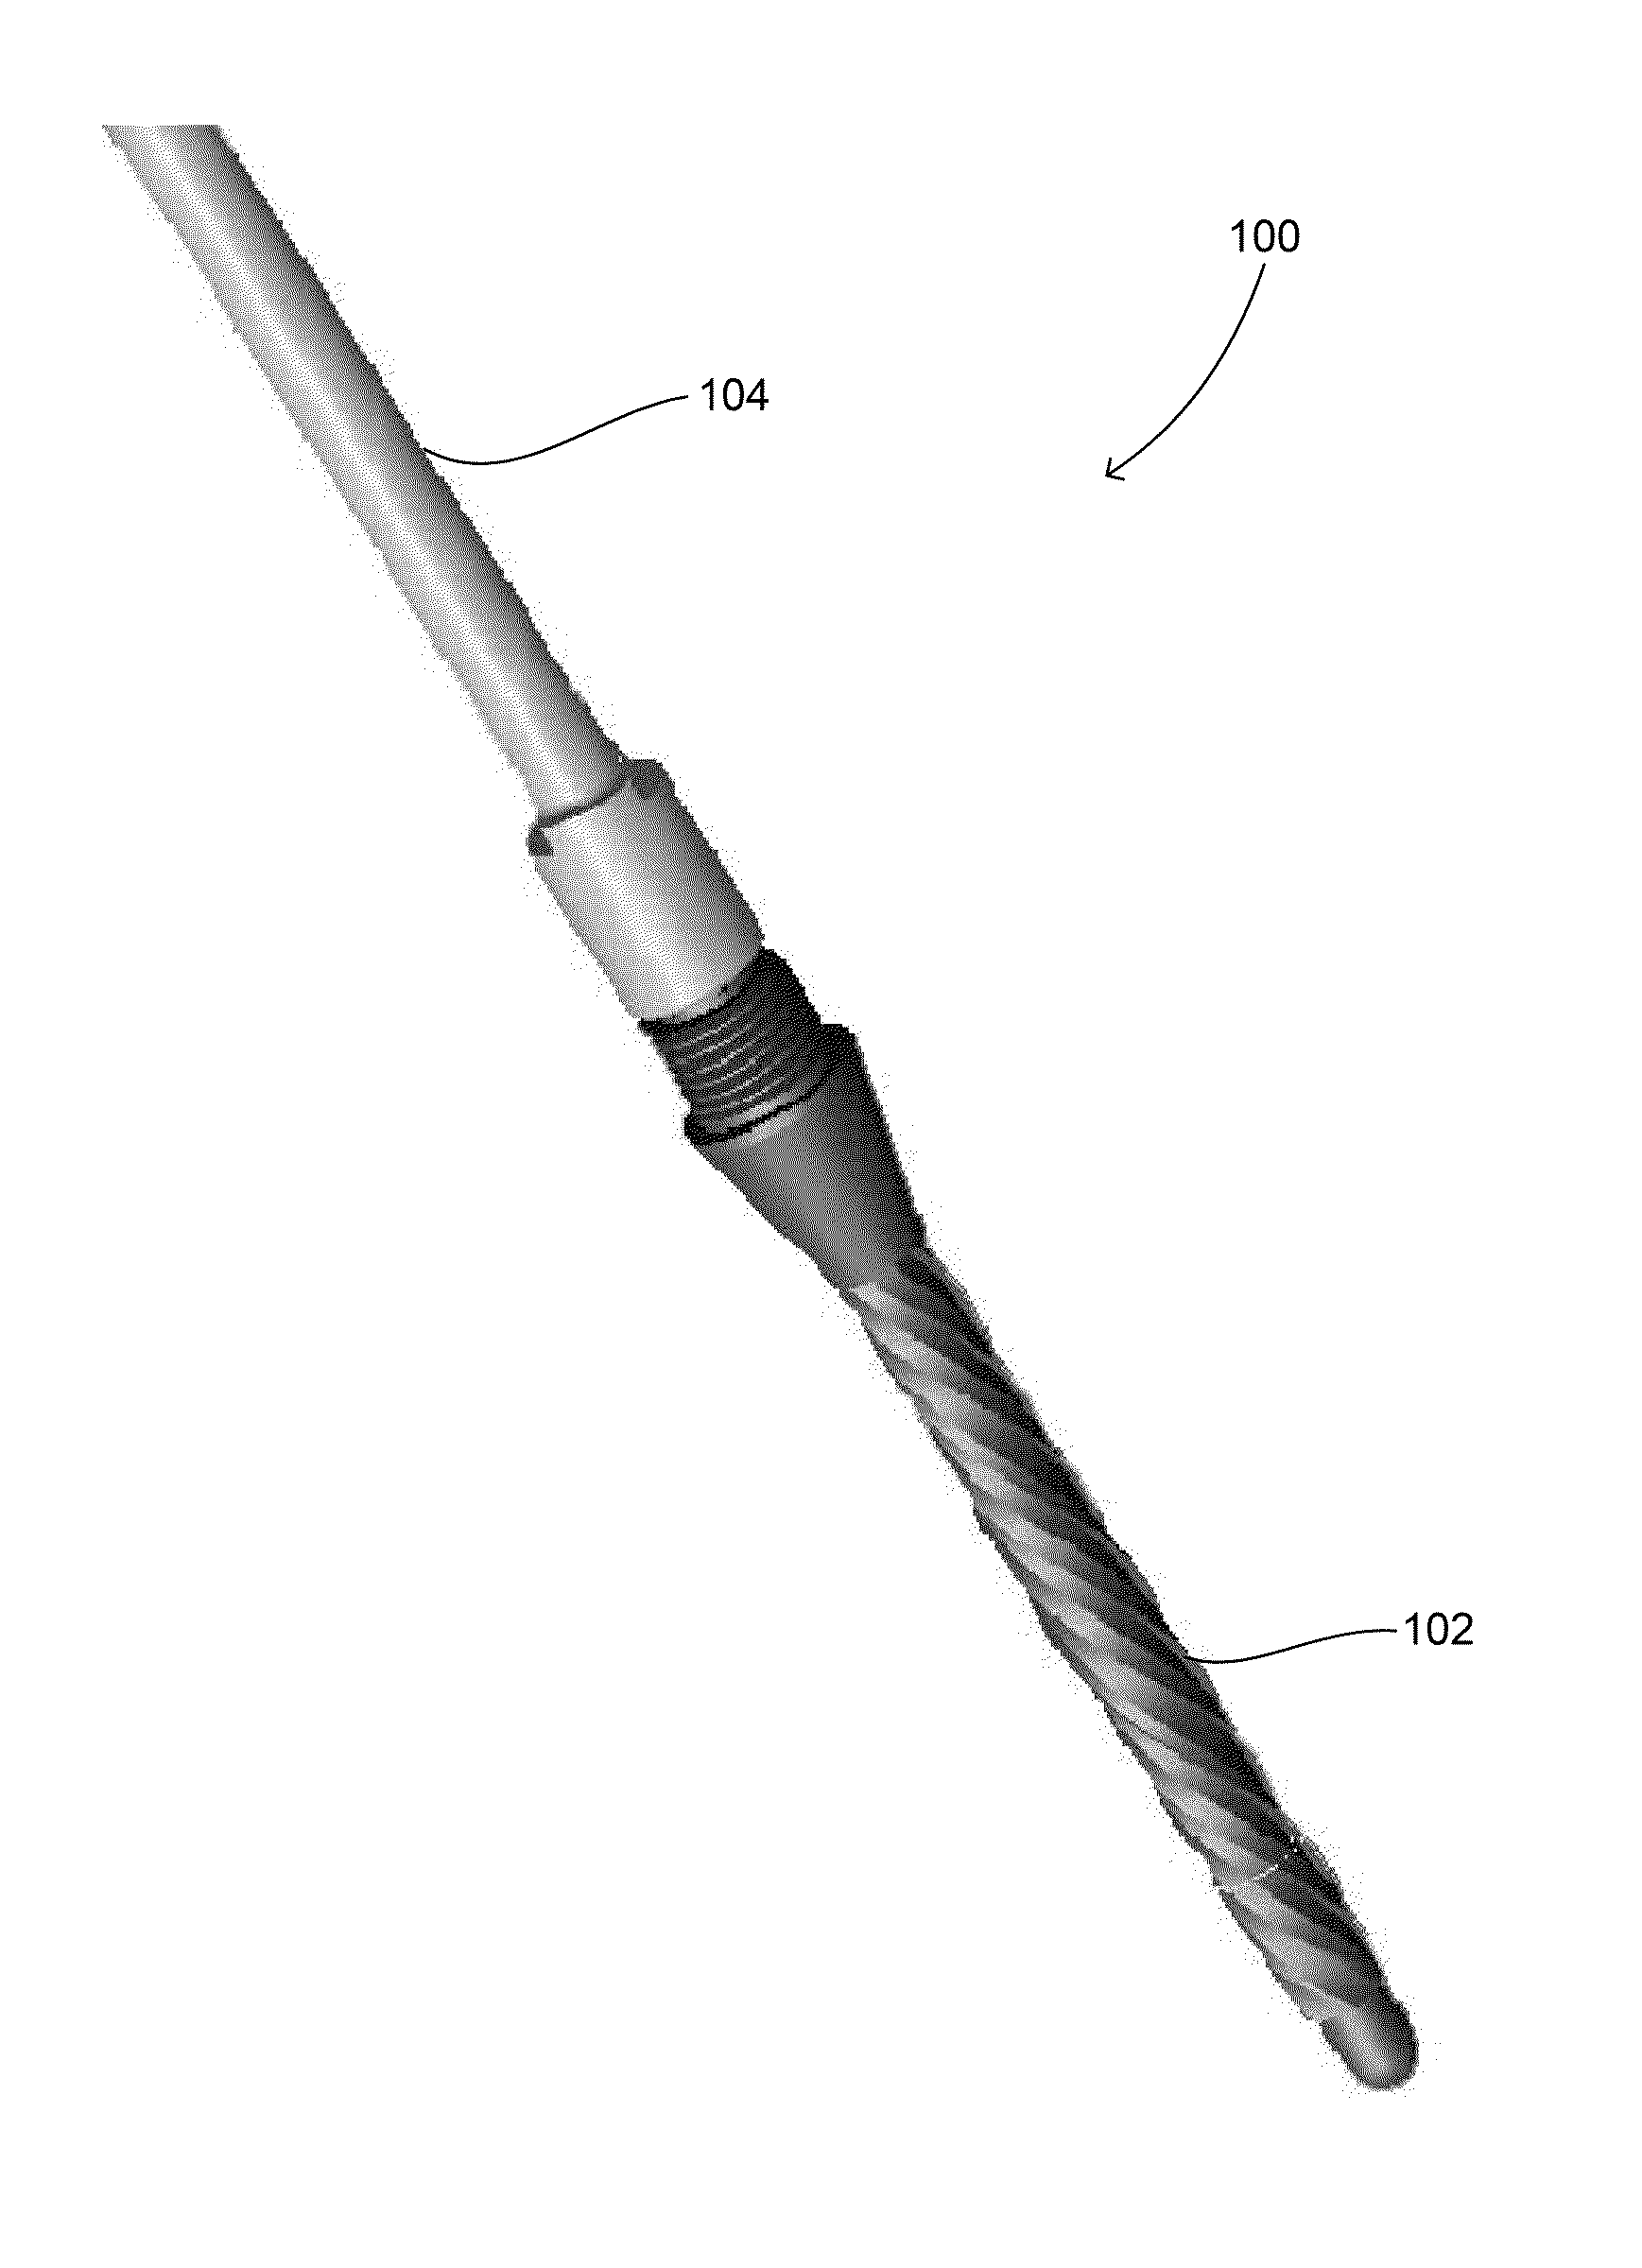 Systems and methods for preparing bone voids to receive a prosthesis